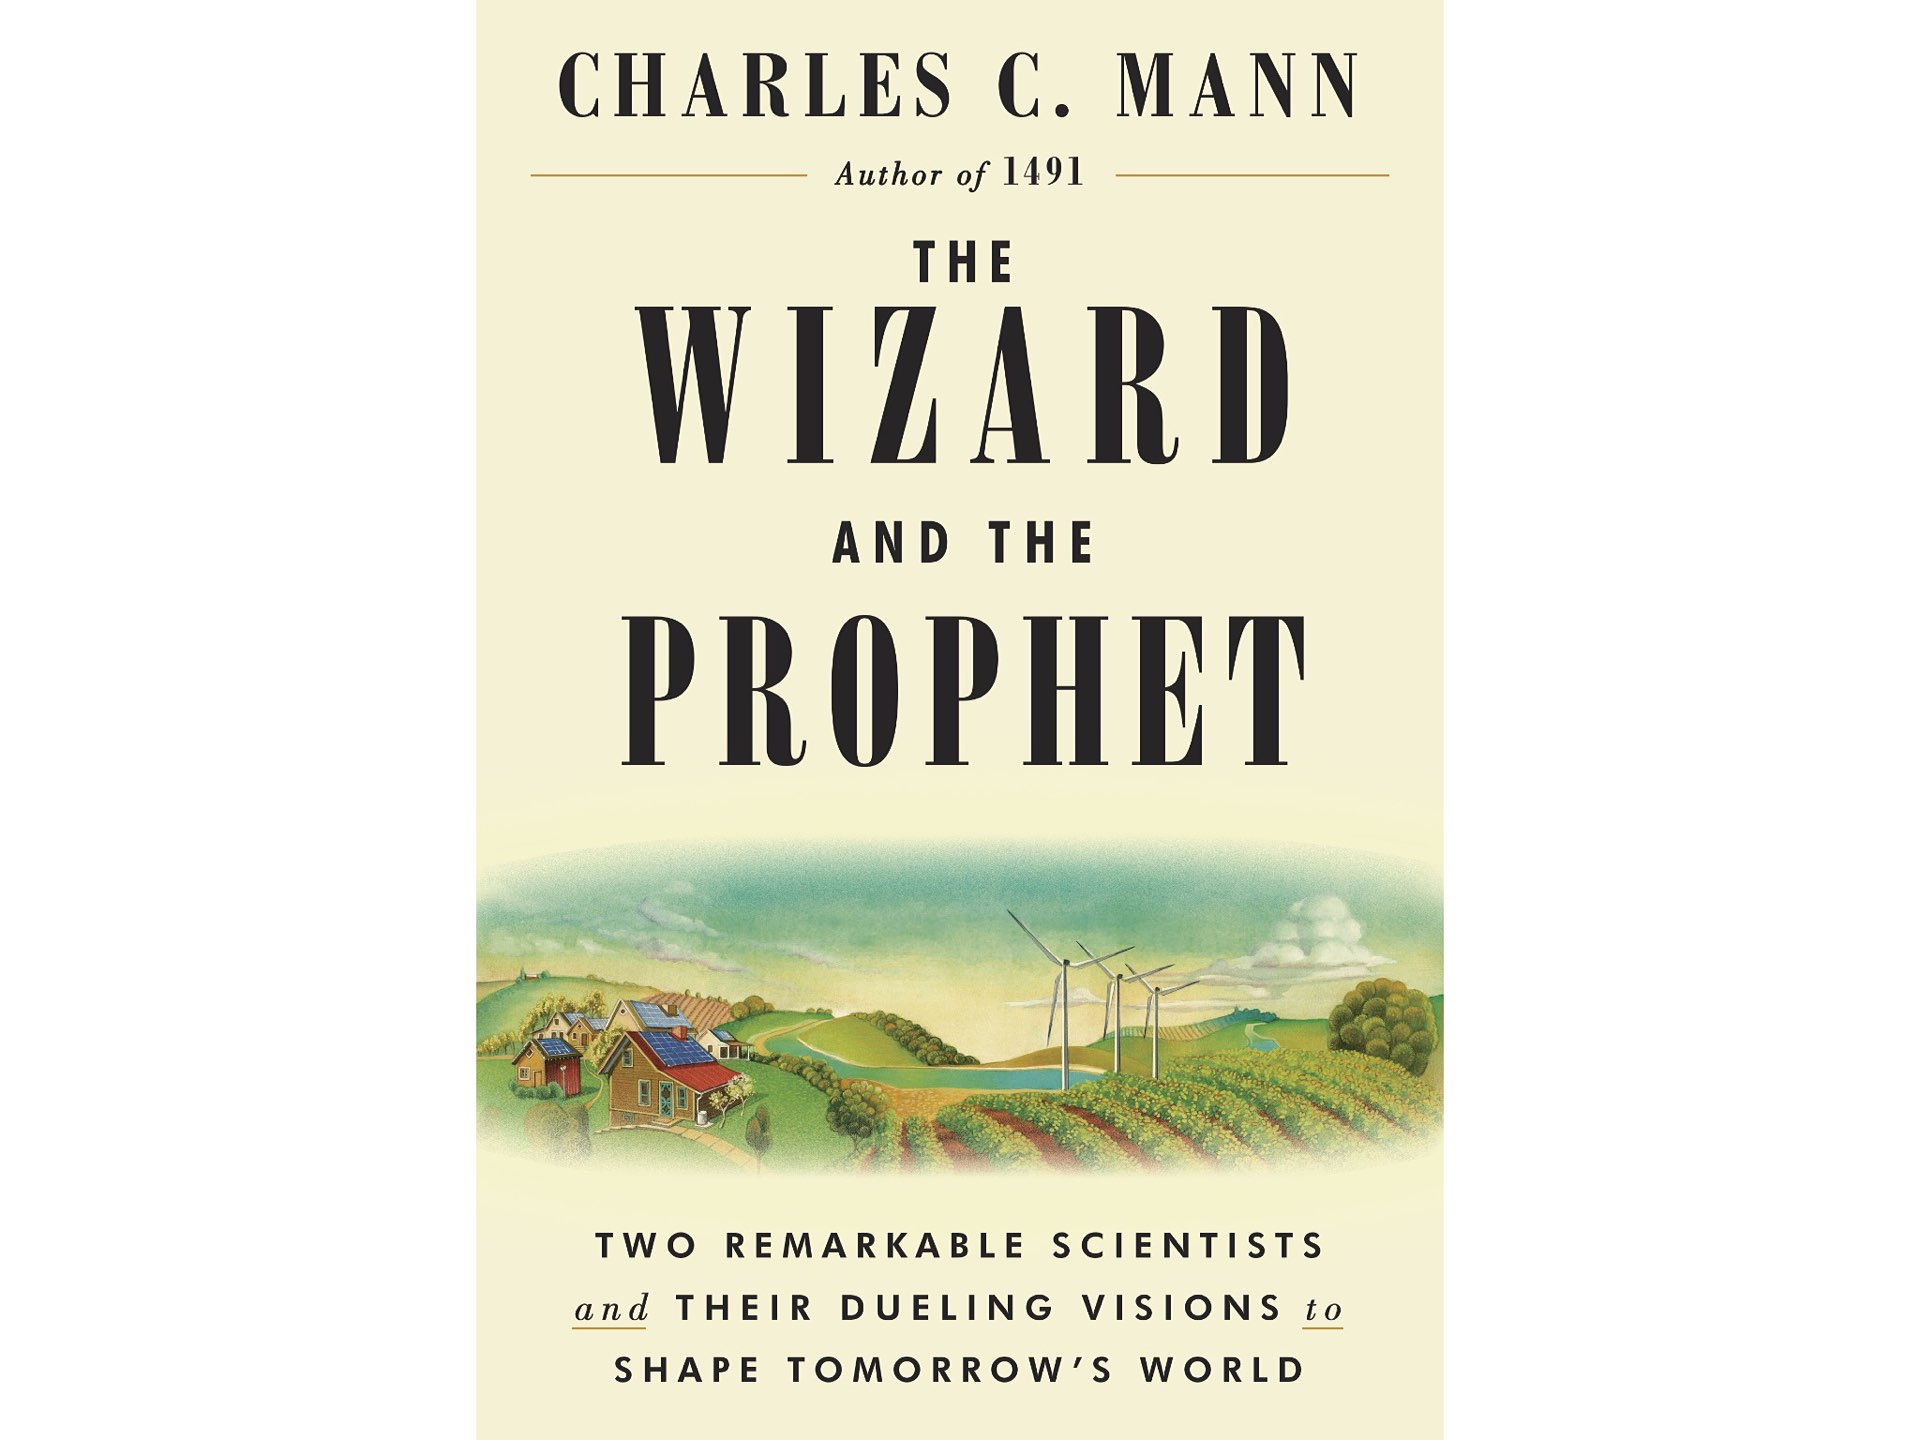 the-wizard-and-the-prophet-by-charles-c-mann